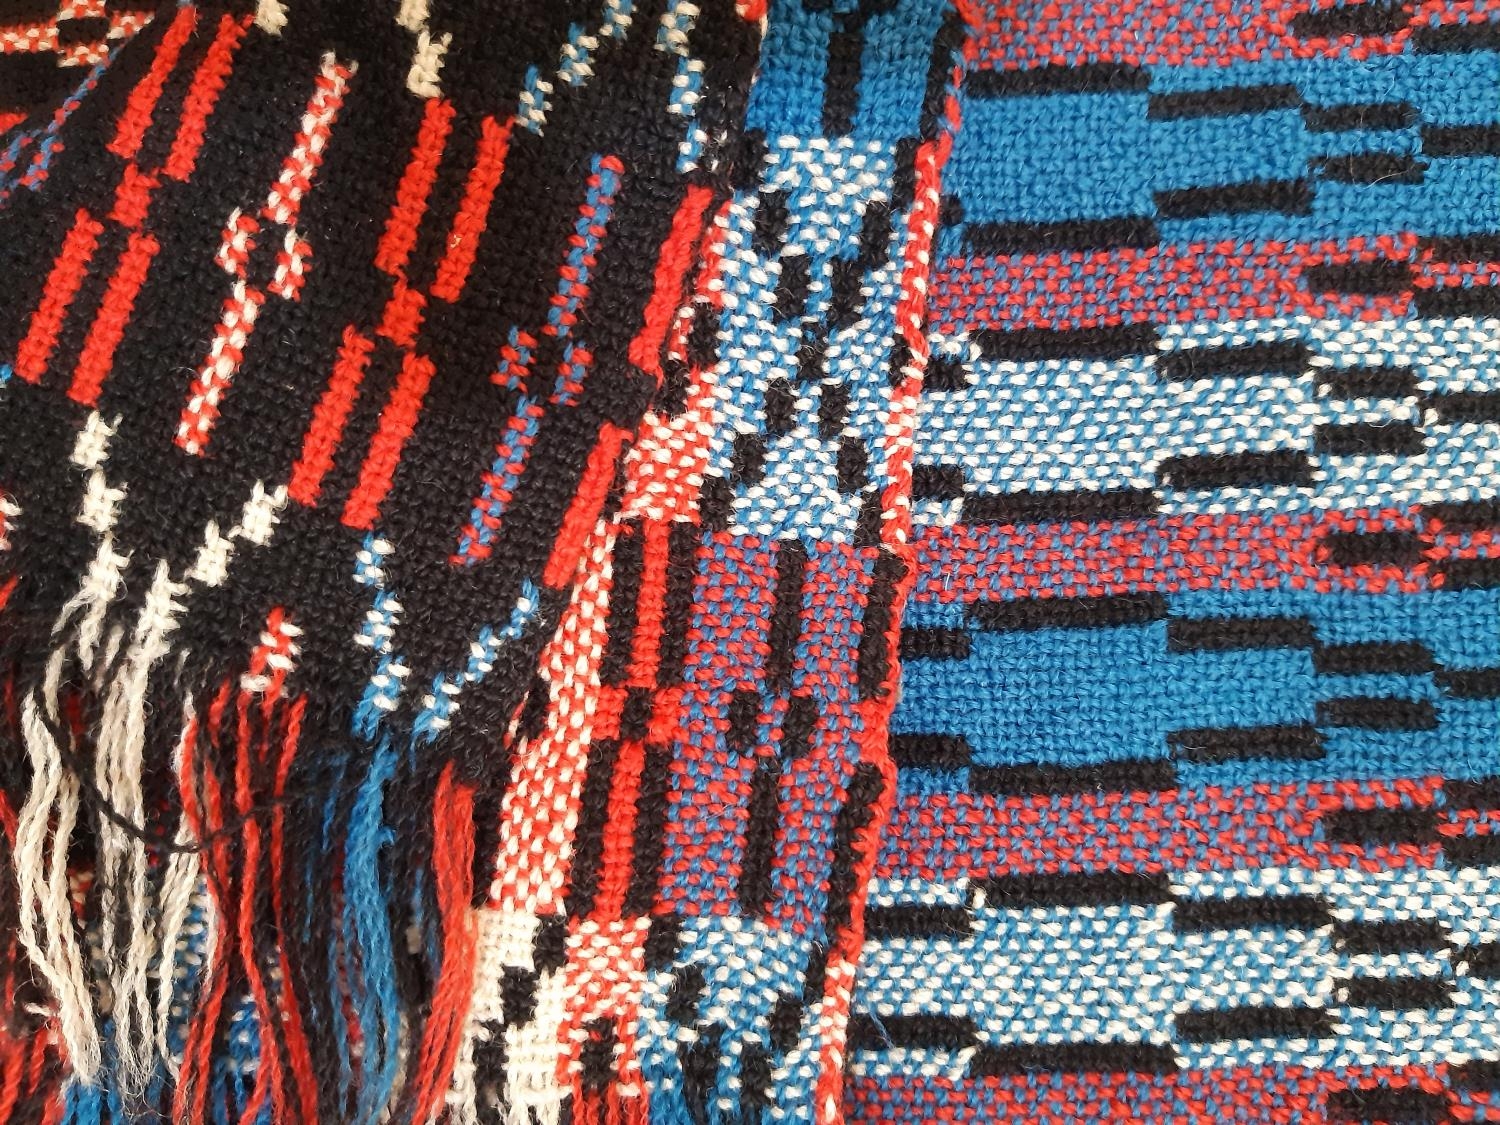 Traditional Welsh woollen blanket in reversible weave in red, blue, black and white, 240x220cm - Image 2 of 3